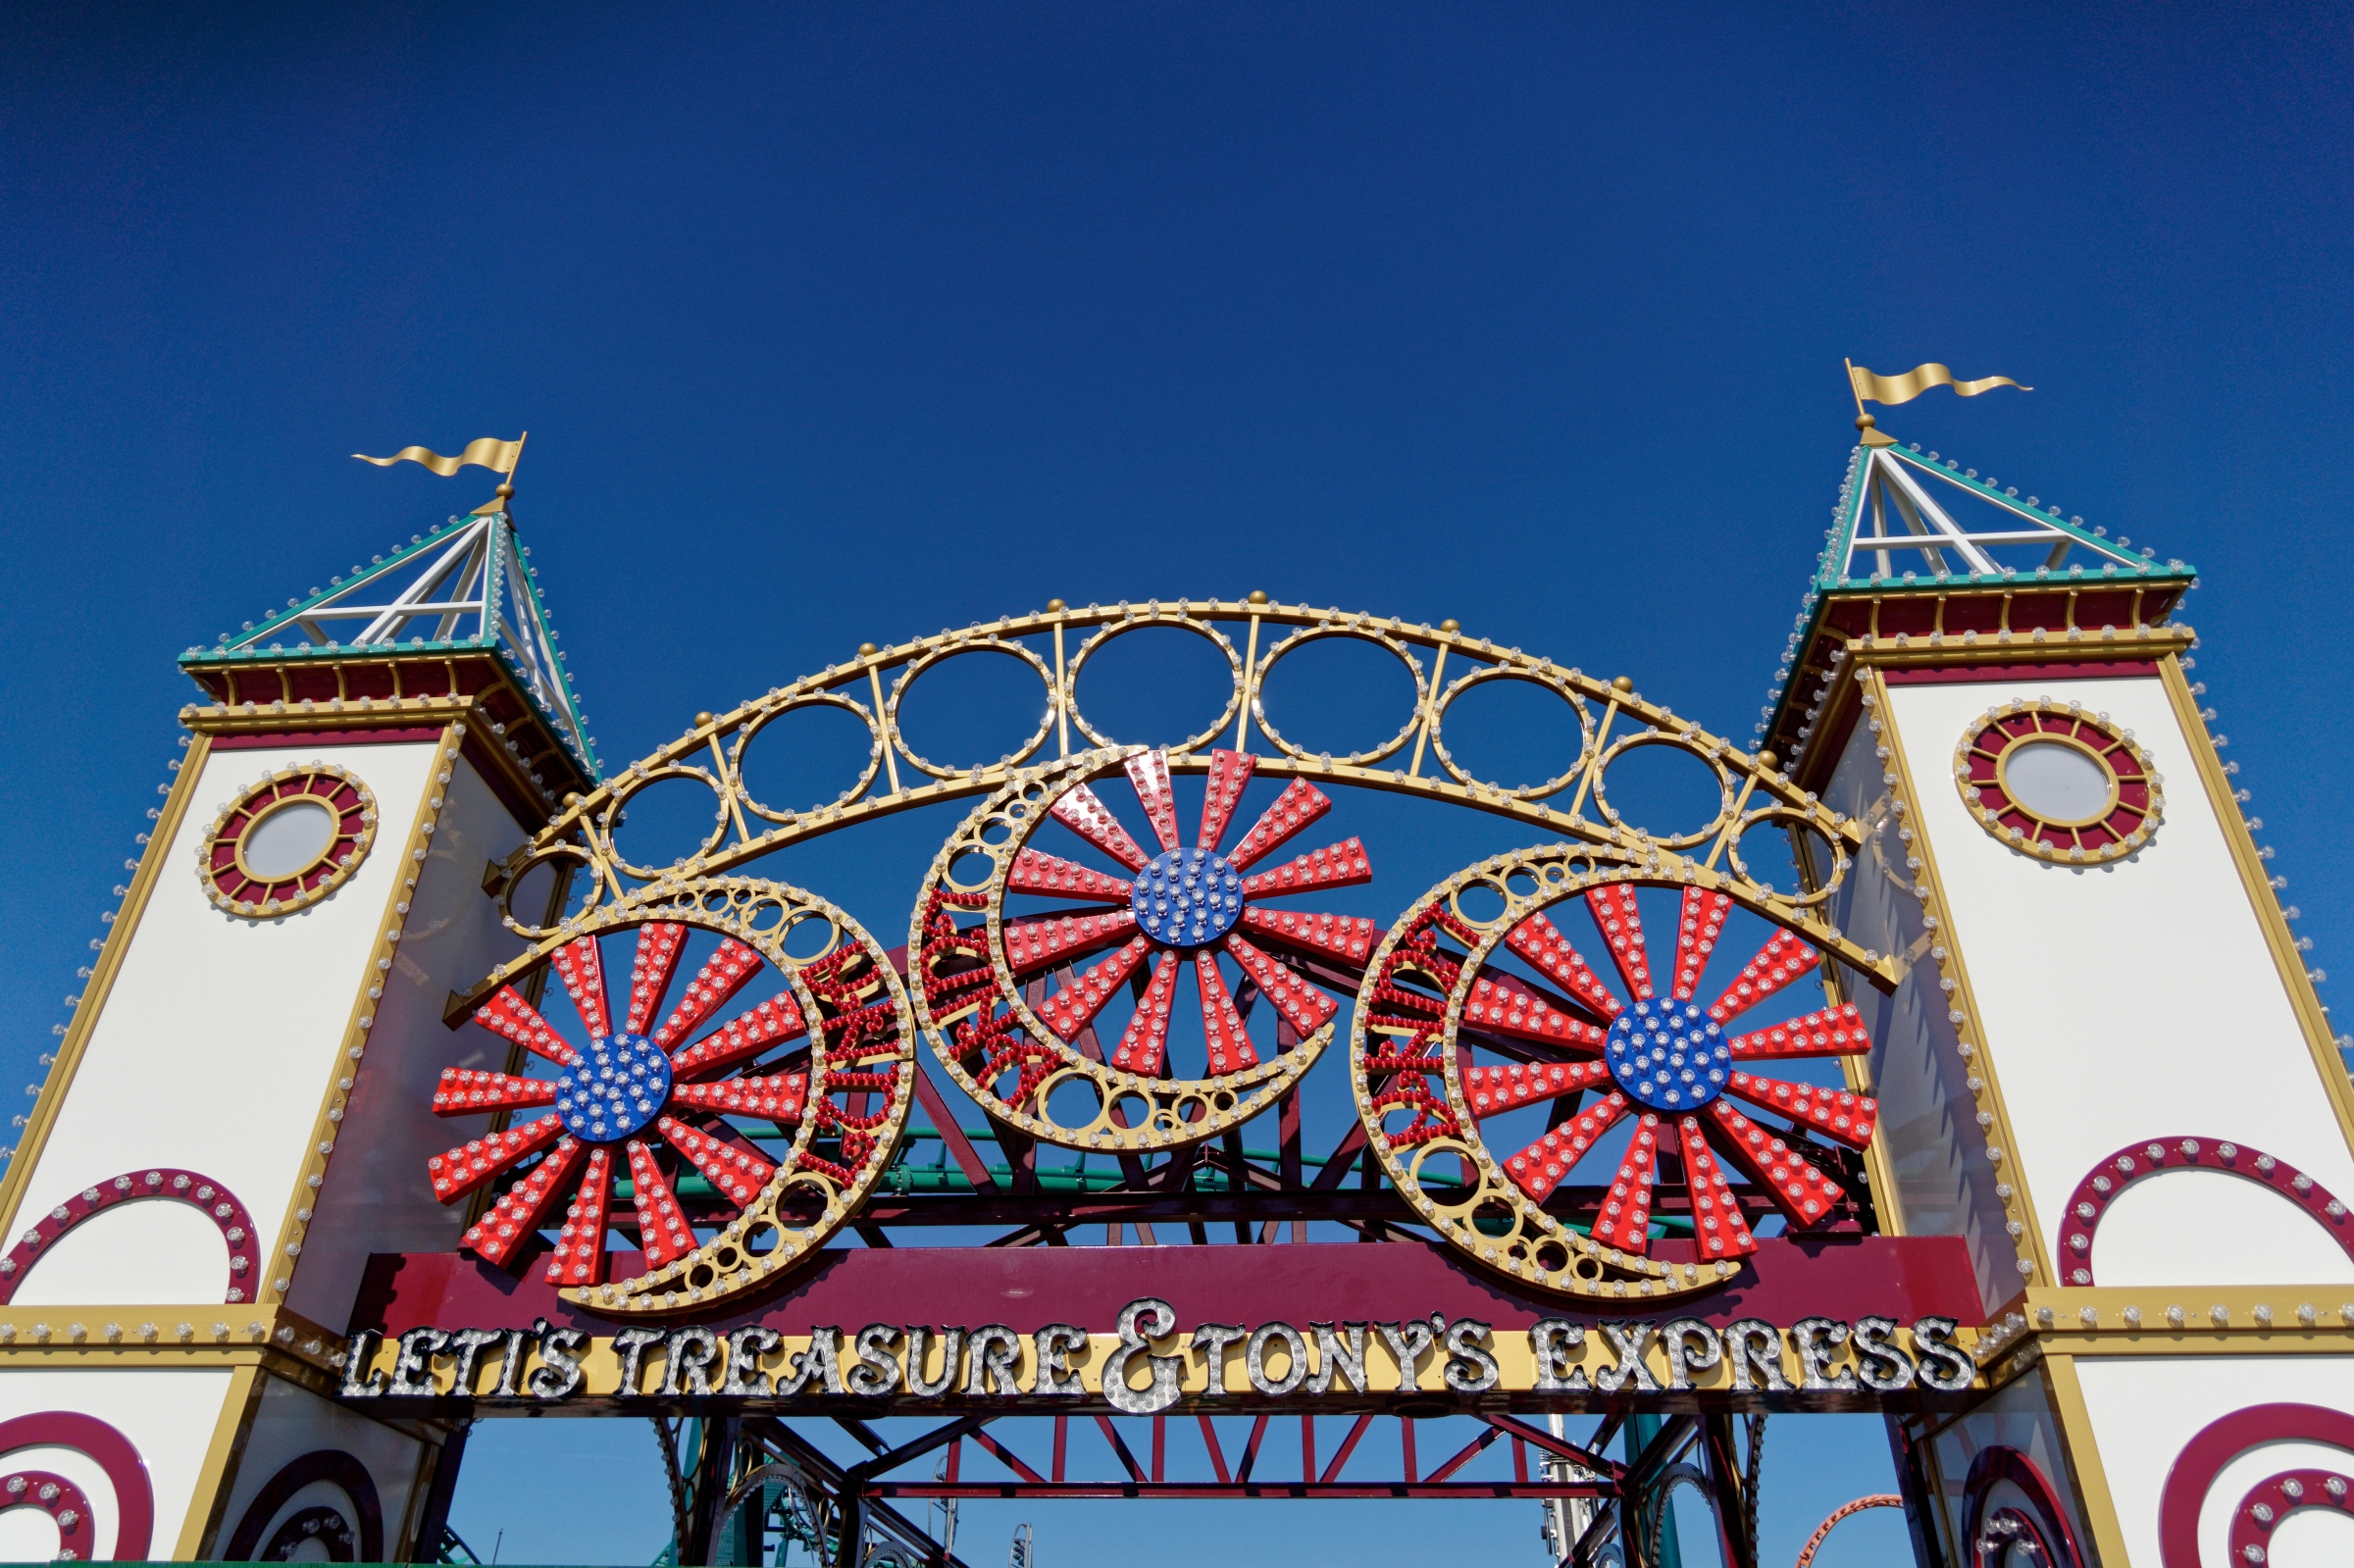 Media Alert: LUNA PARK IN CONEY ISLAND PAYS HOMAGE TO FAMILY ROOTS WITH NEW RIDE NAMES